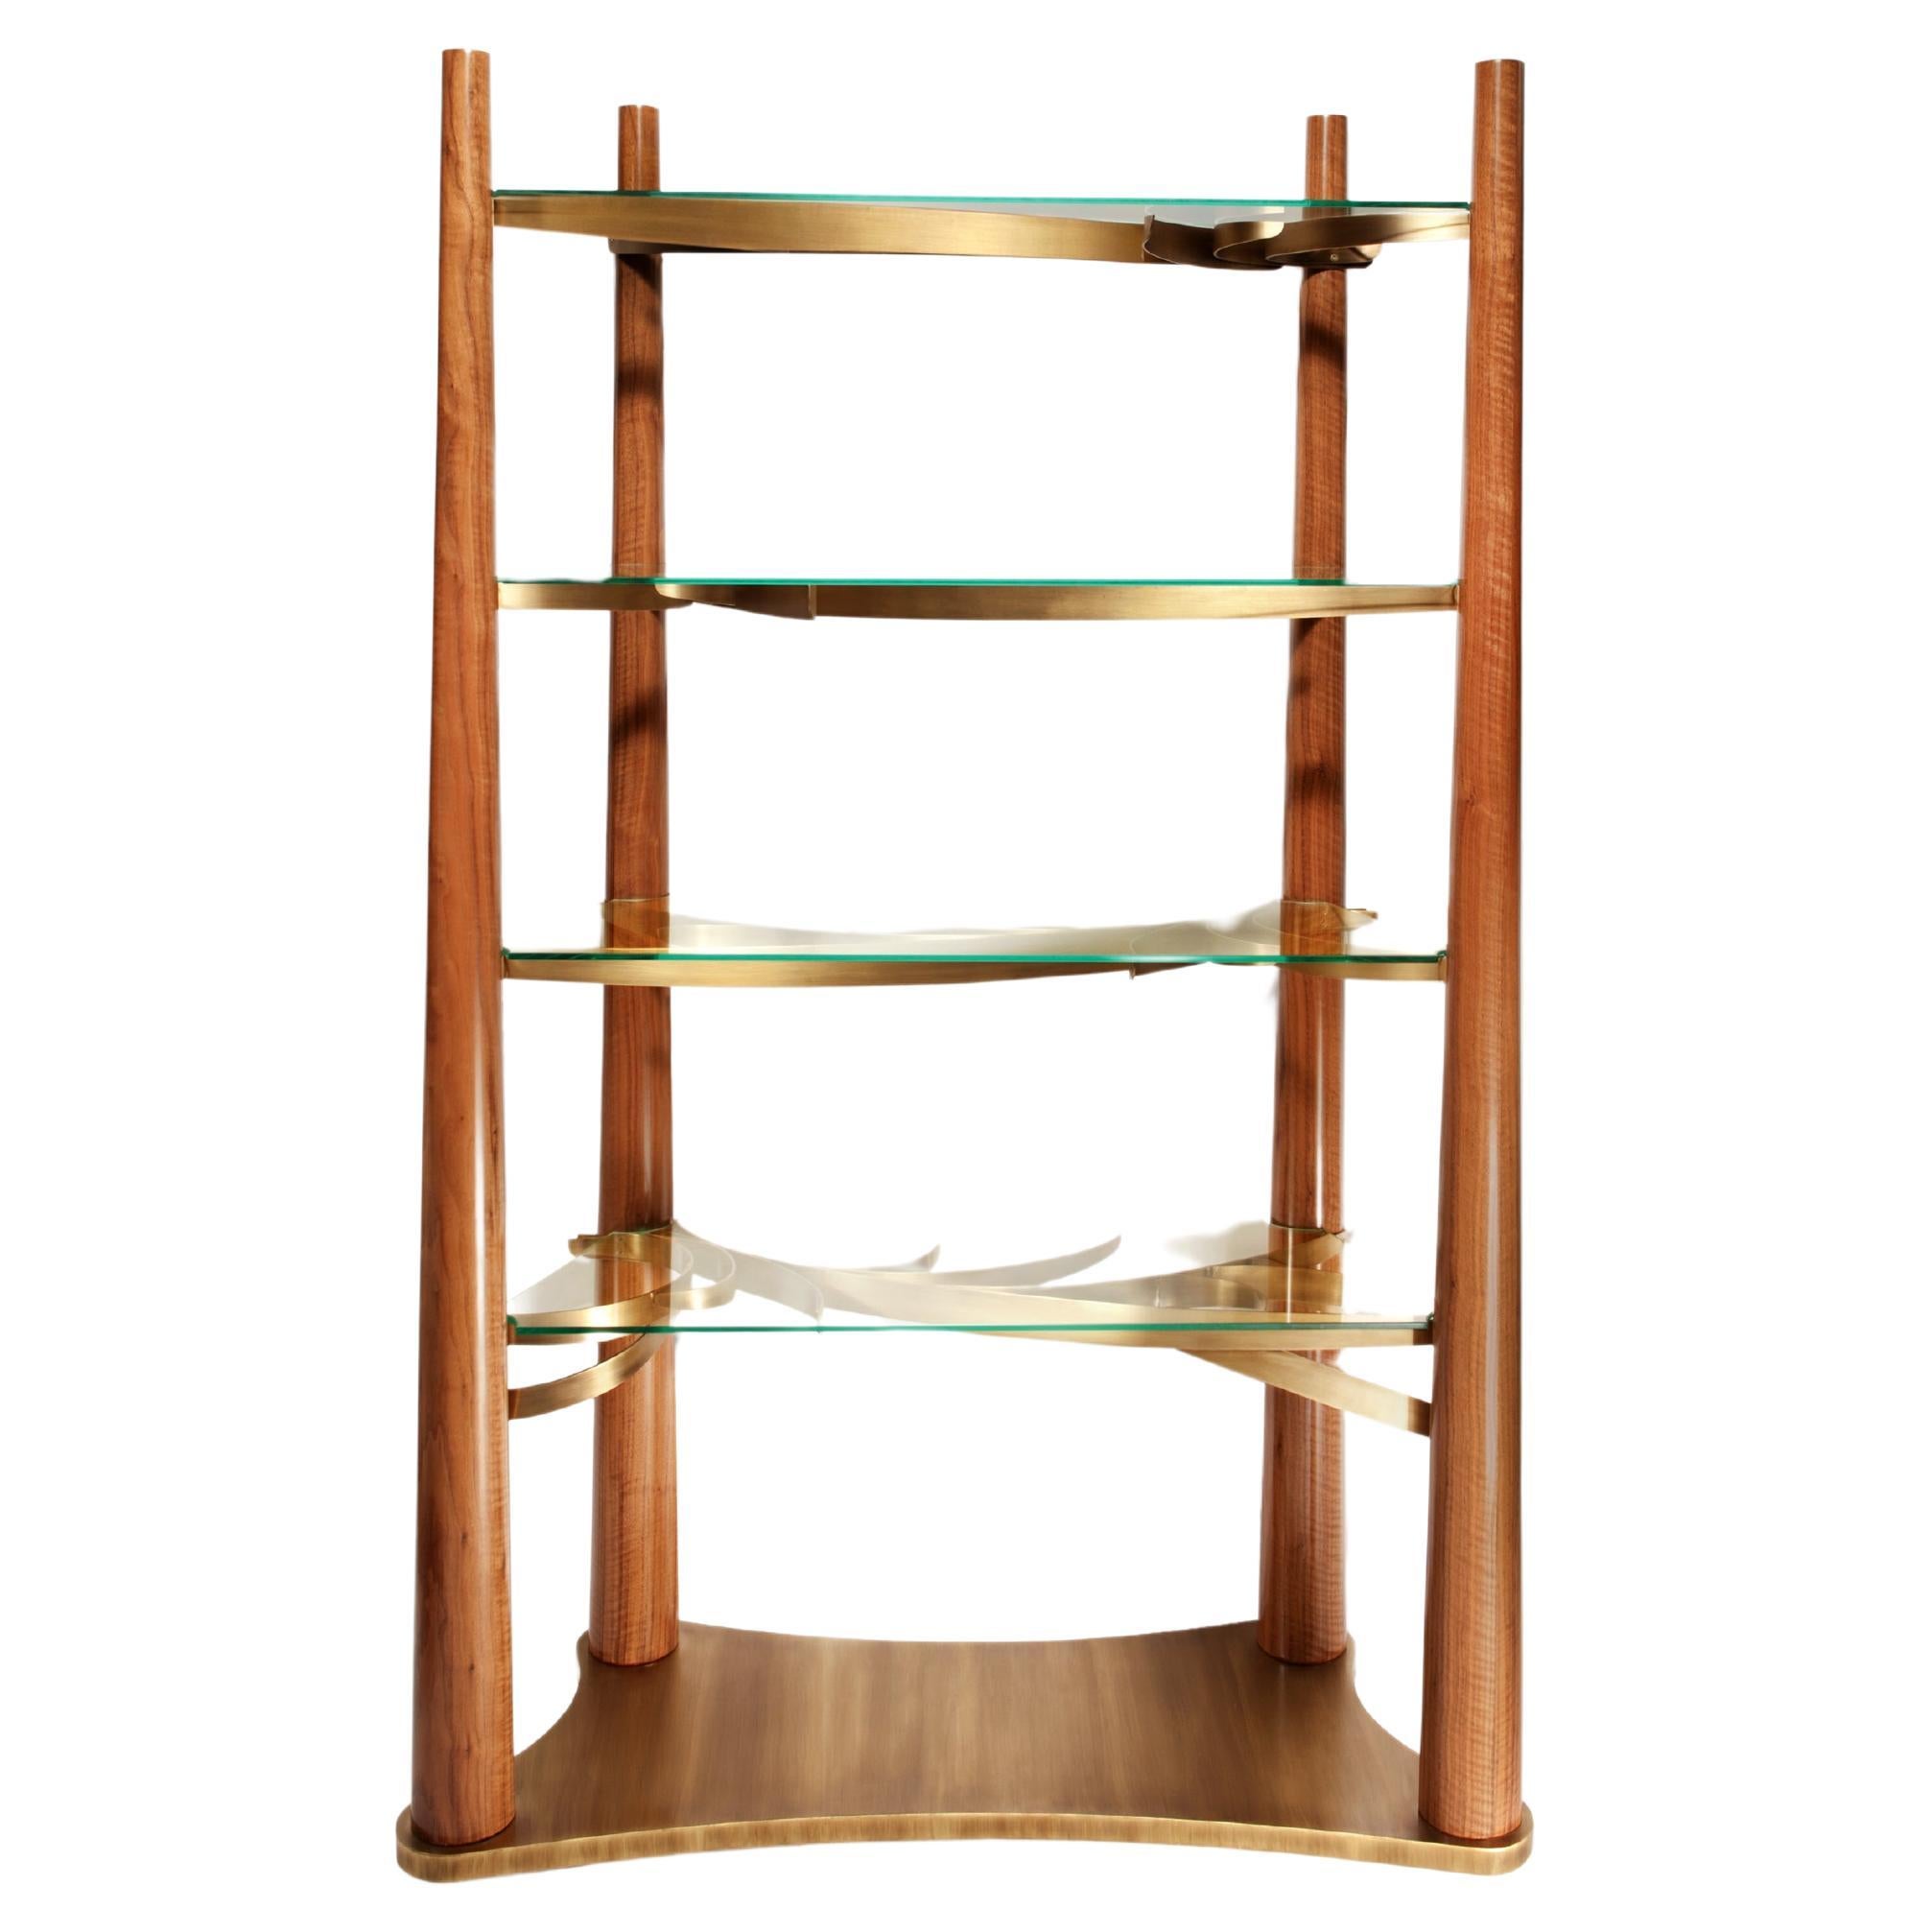 Into The Woods Walnut Bookcase by InsidherLand